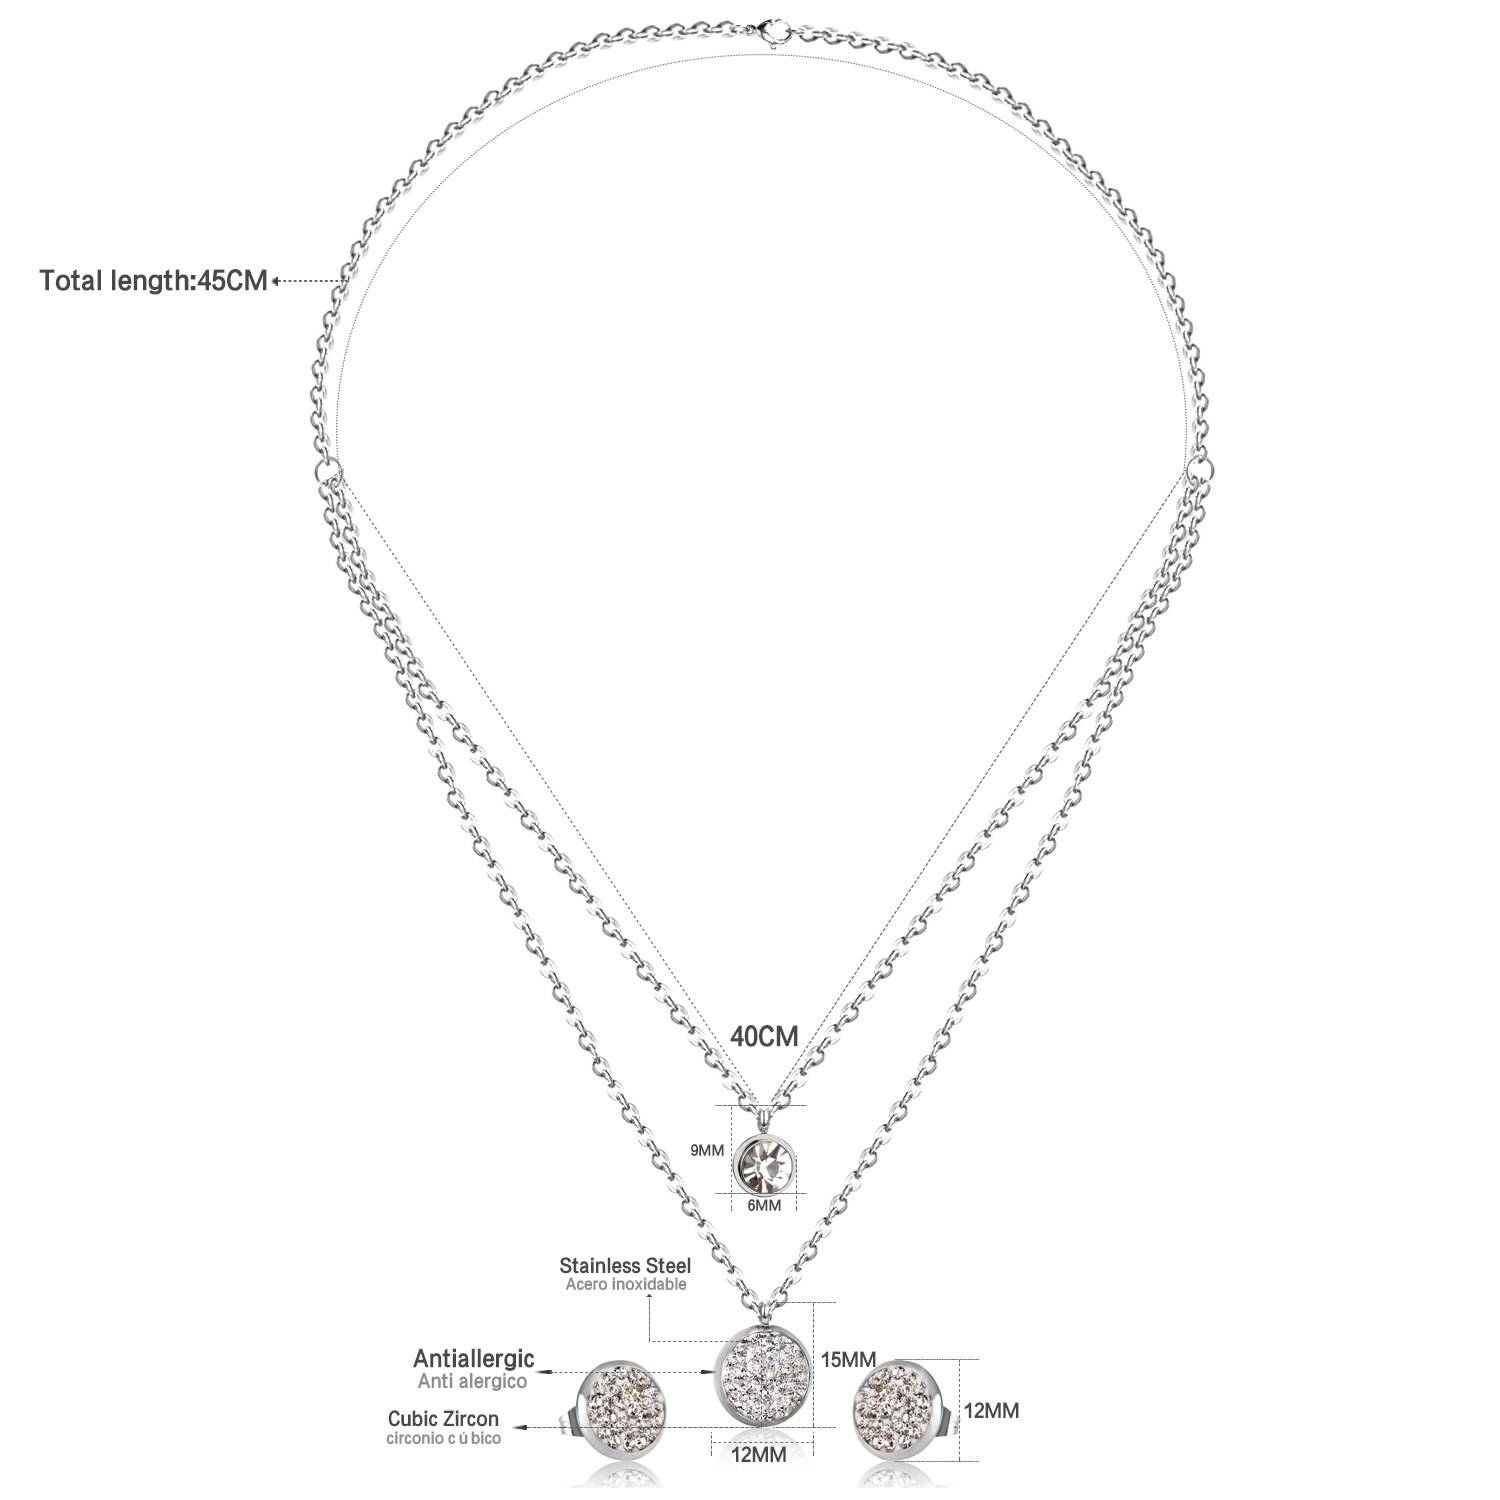 LUXUKISSKIDS Round Crystal Double Necklace Earring Wedding Bridal Dubai Jewelry Sets Stainless Steel Jewelry Set For Women Girl